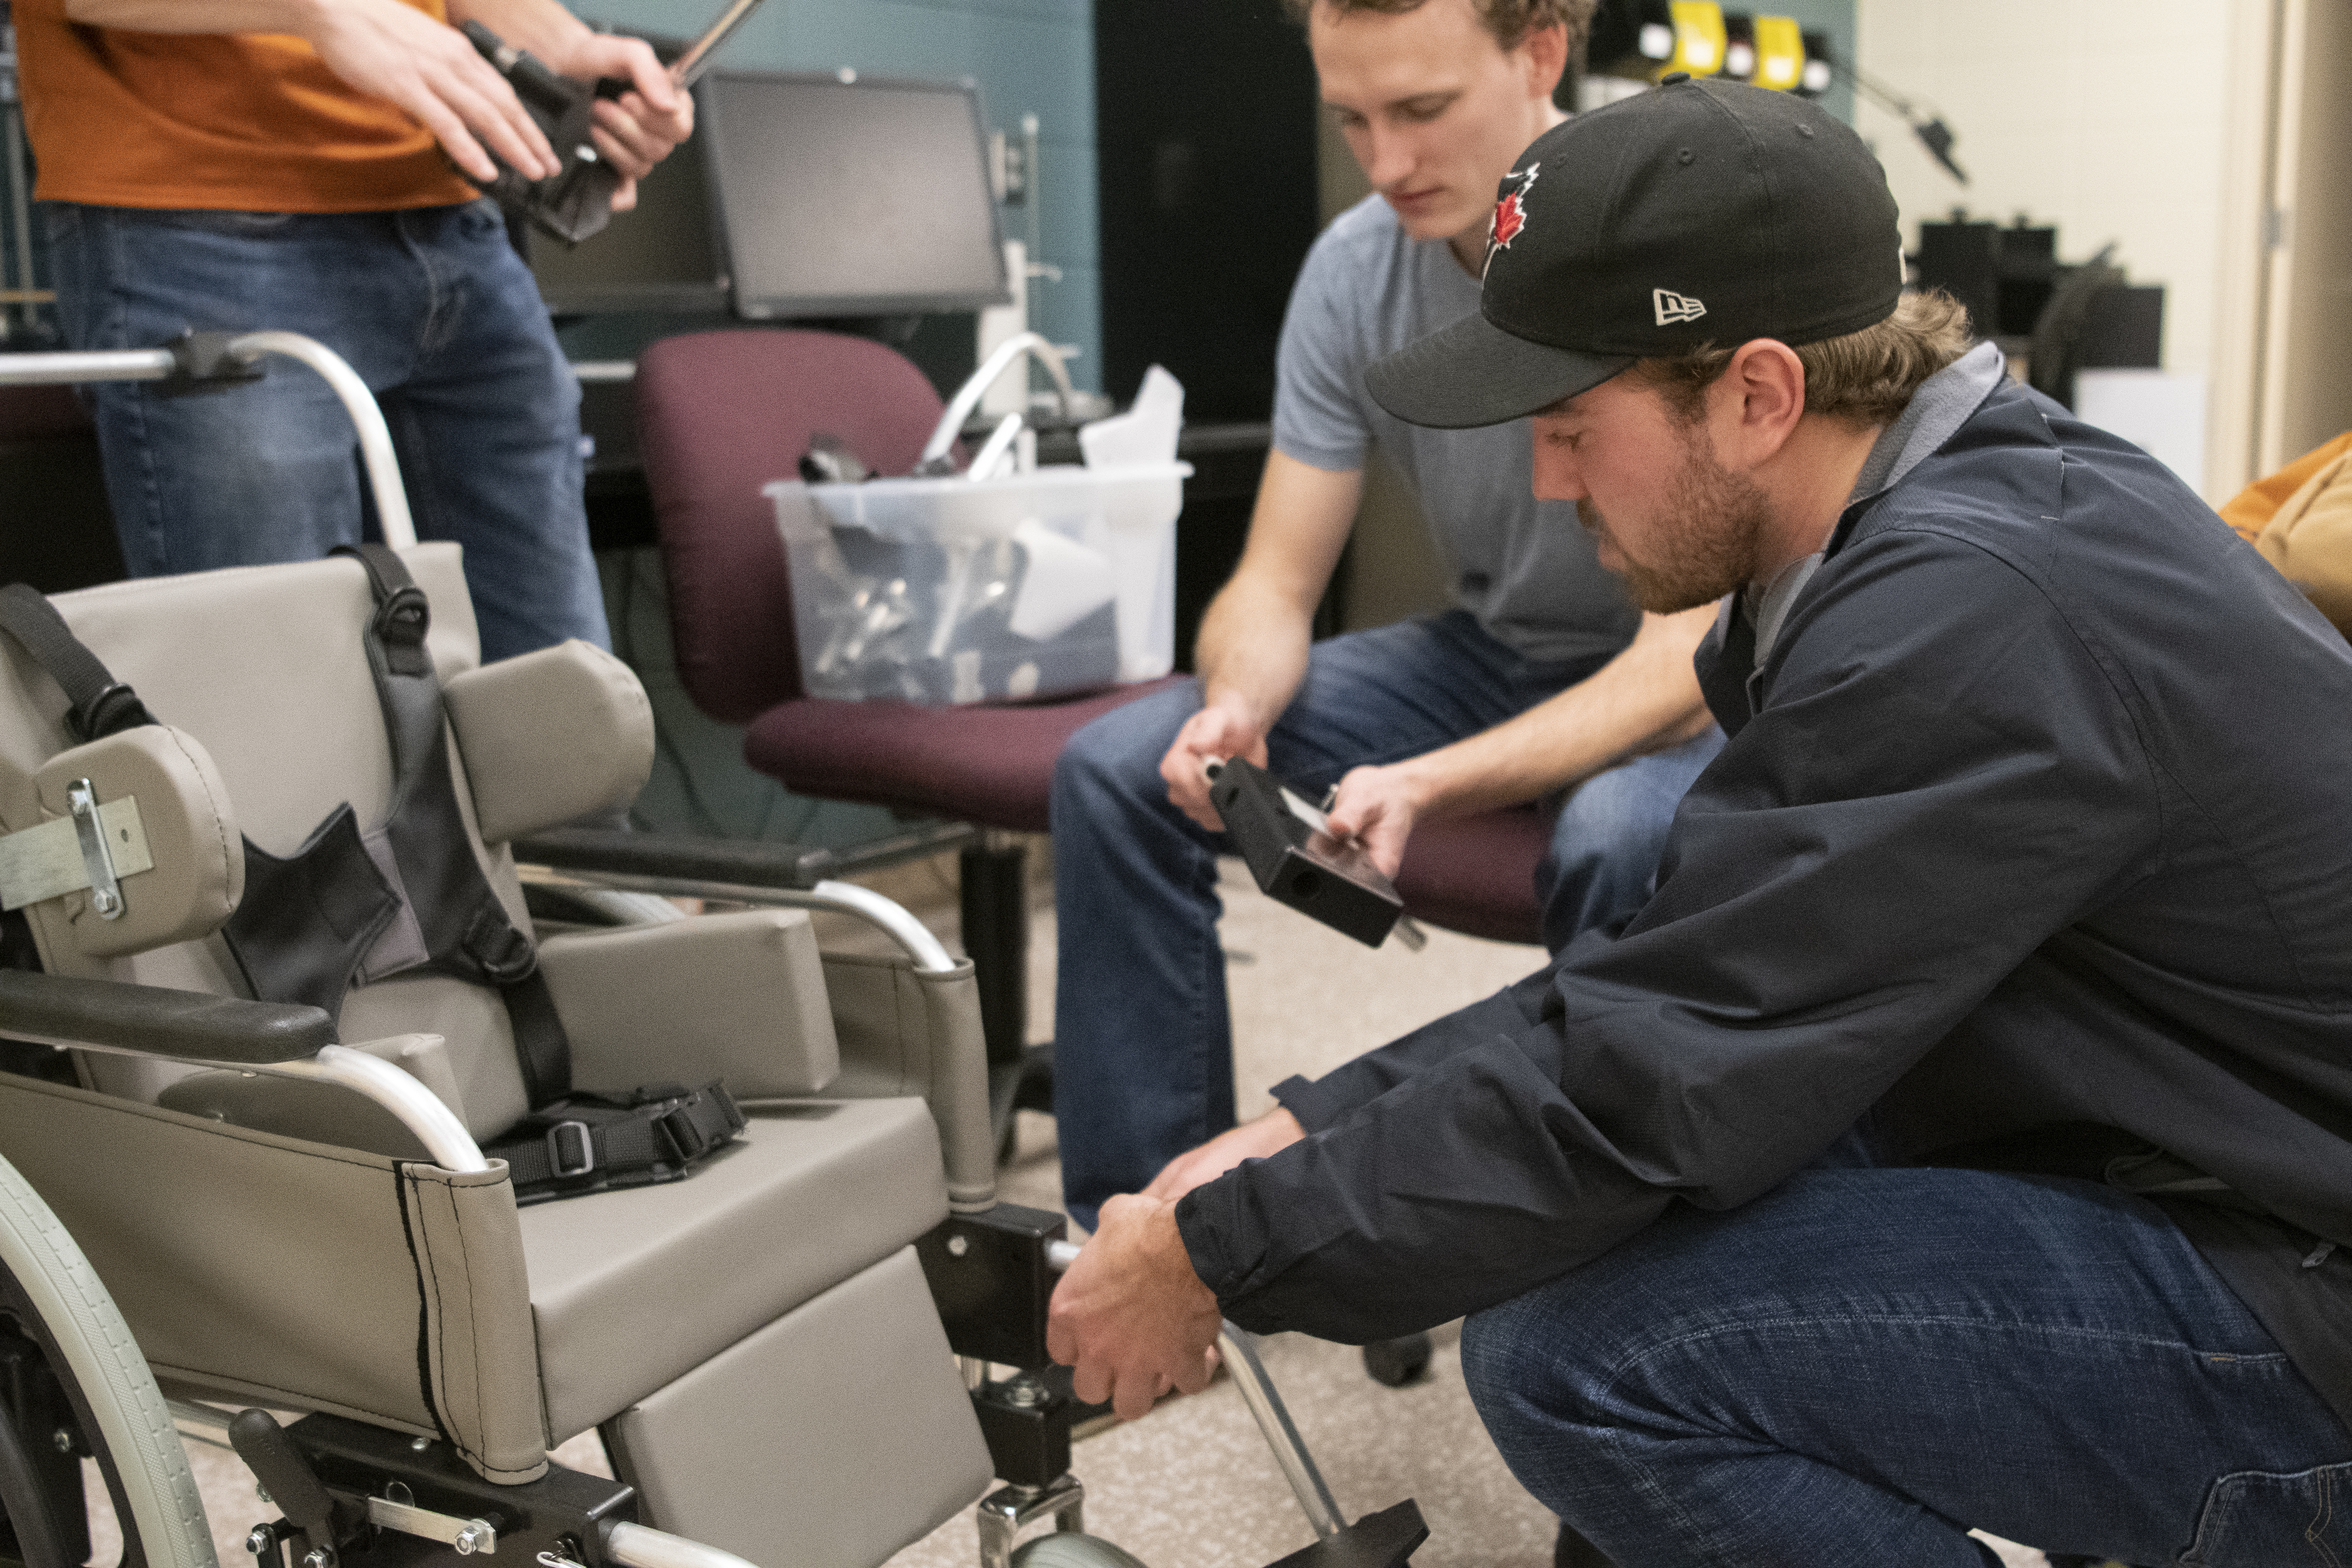 A male students works alongside others on a wheelchair project